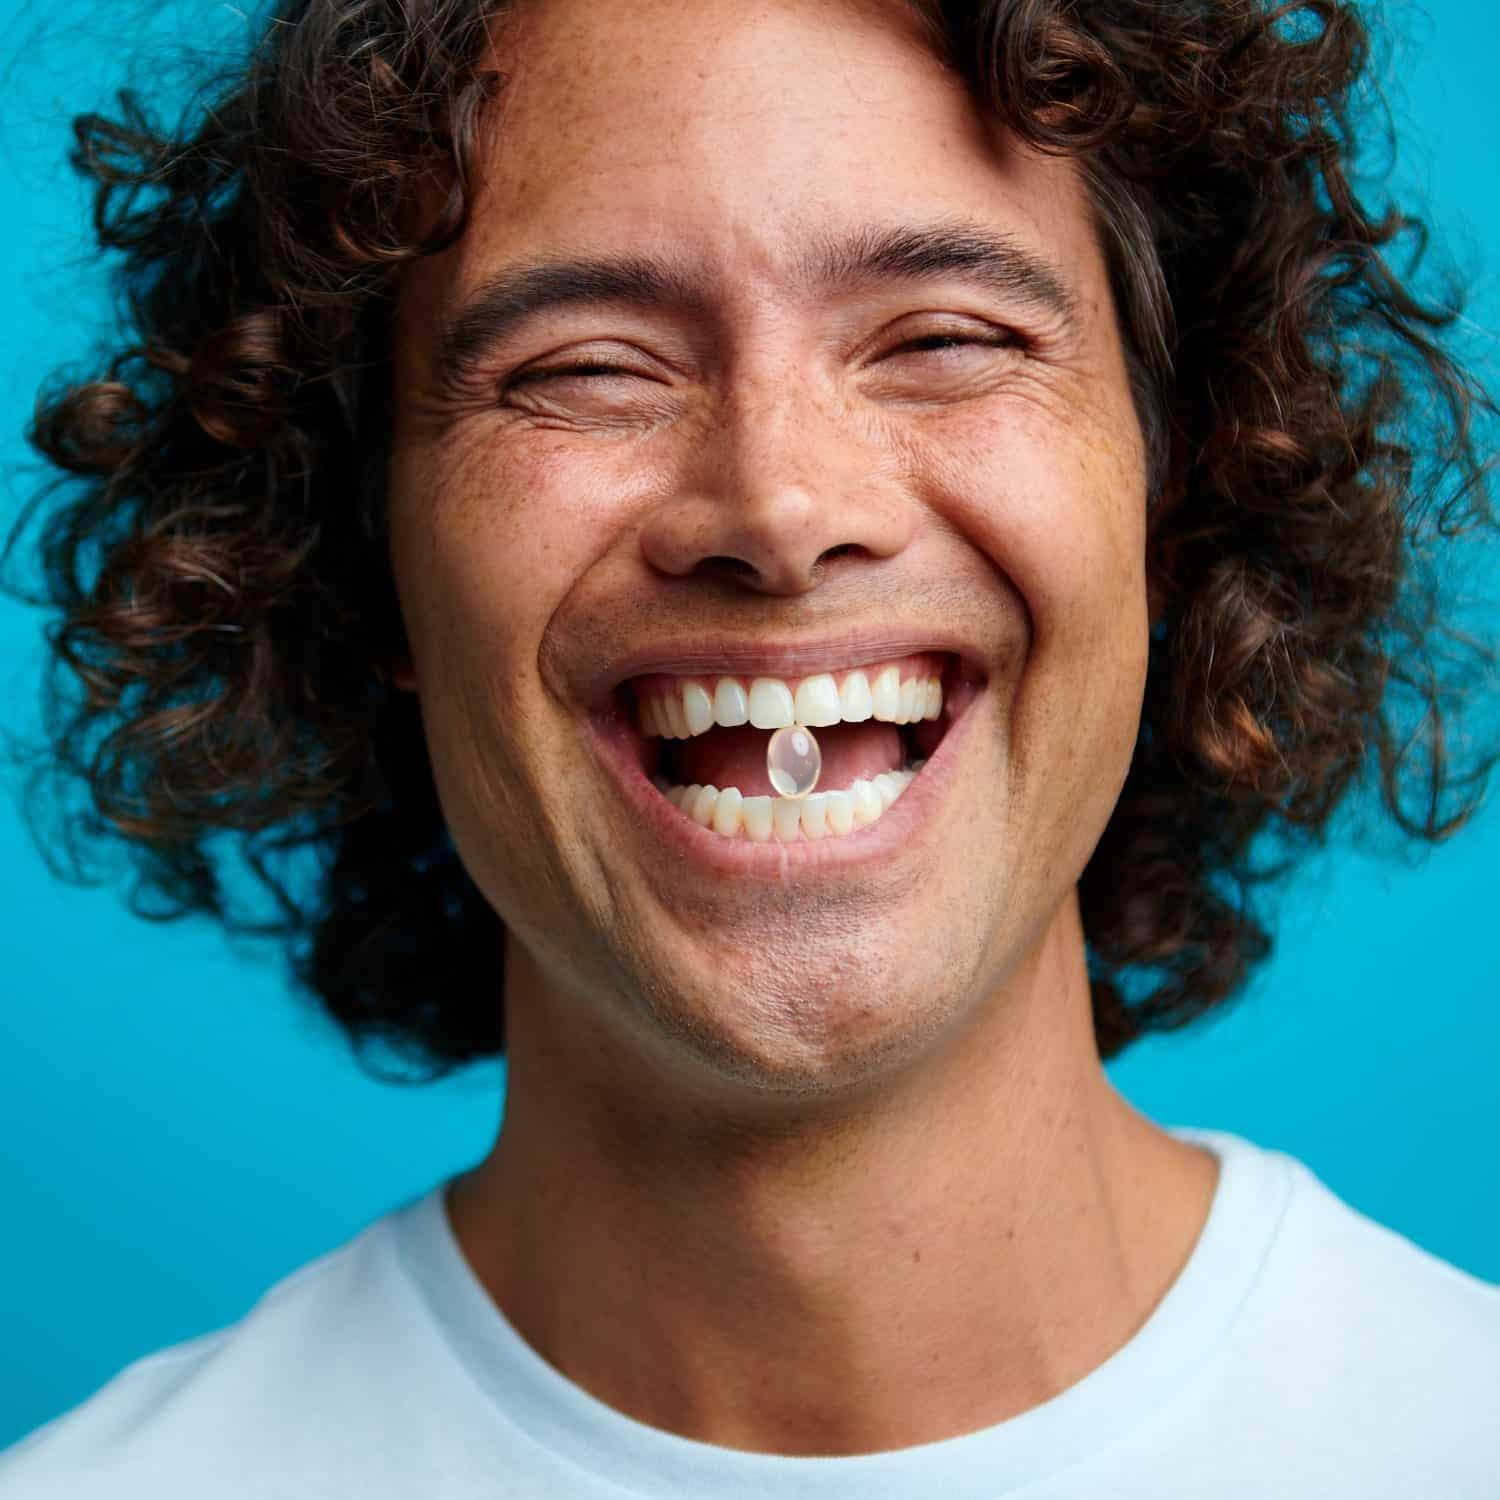 A person with curly hair smiling widely, with a 'Slumber CBN softgel capsule' in their mouth, against a blue backdrop, depicting a sense of well-being and satisfaction associated with the product.